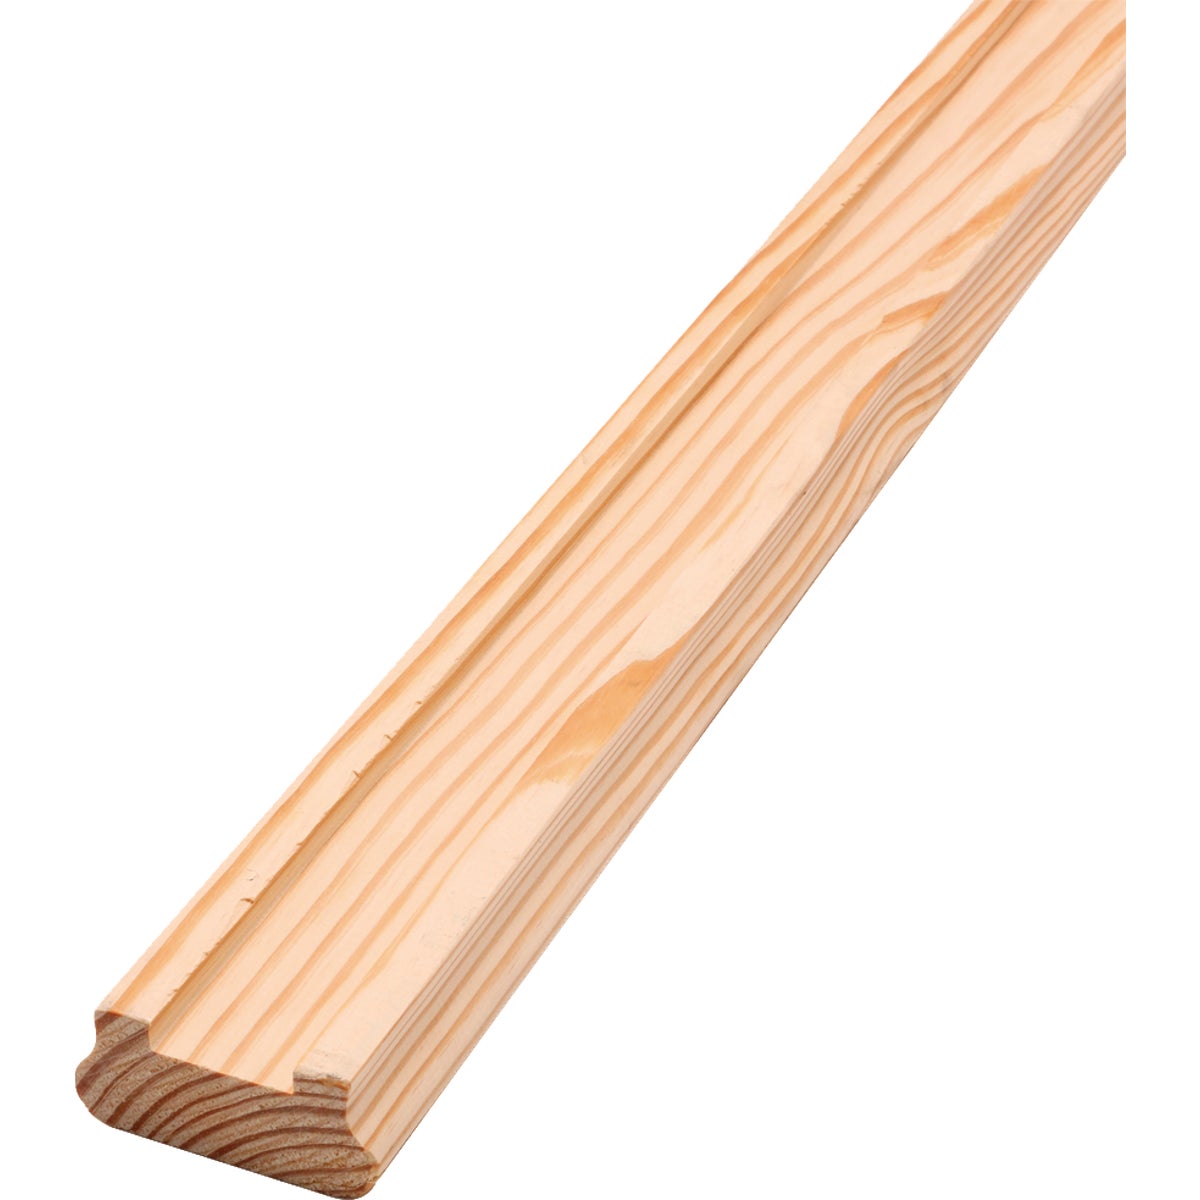 Prowood 2 In X 4 In X 8 Ft Natural Treated Wood Deck Handrail